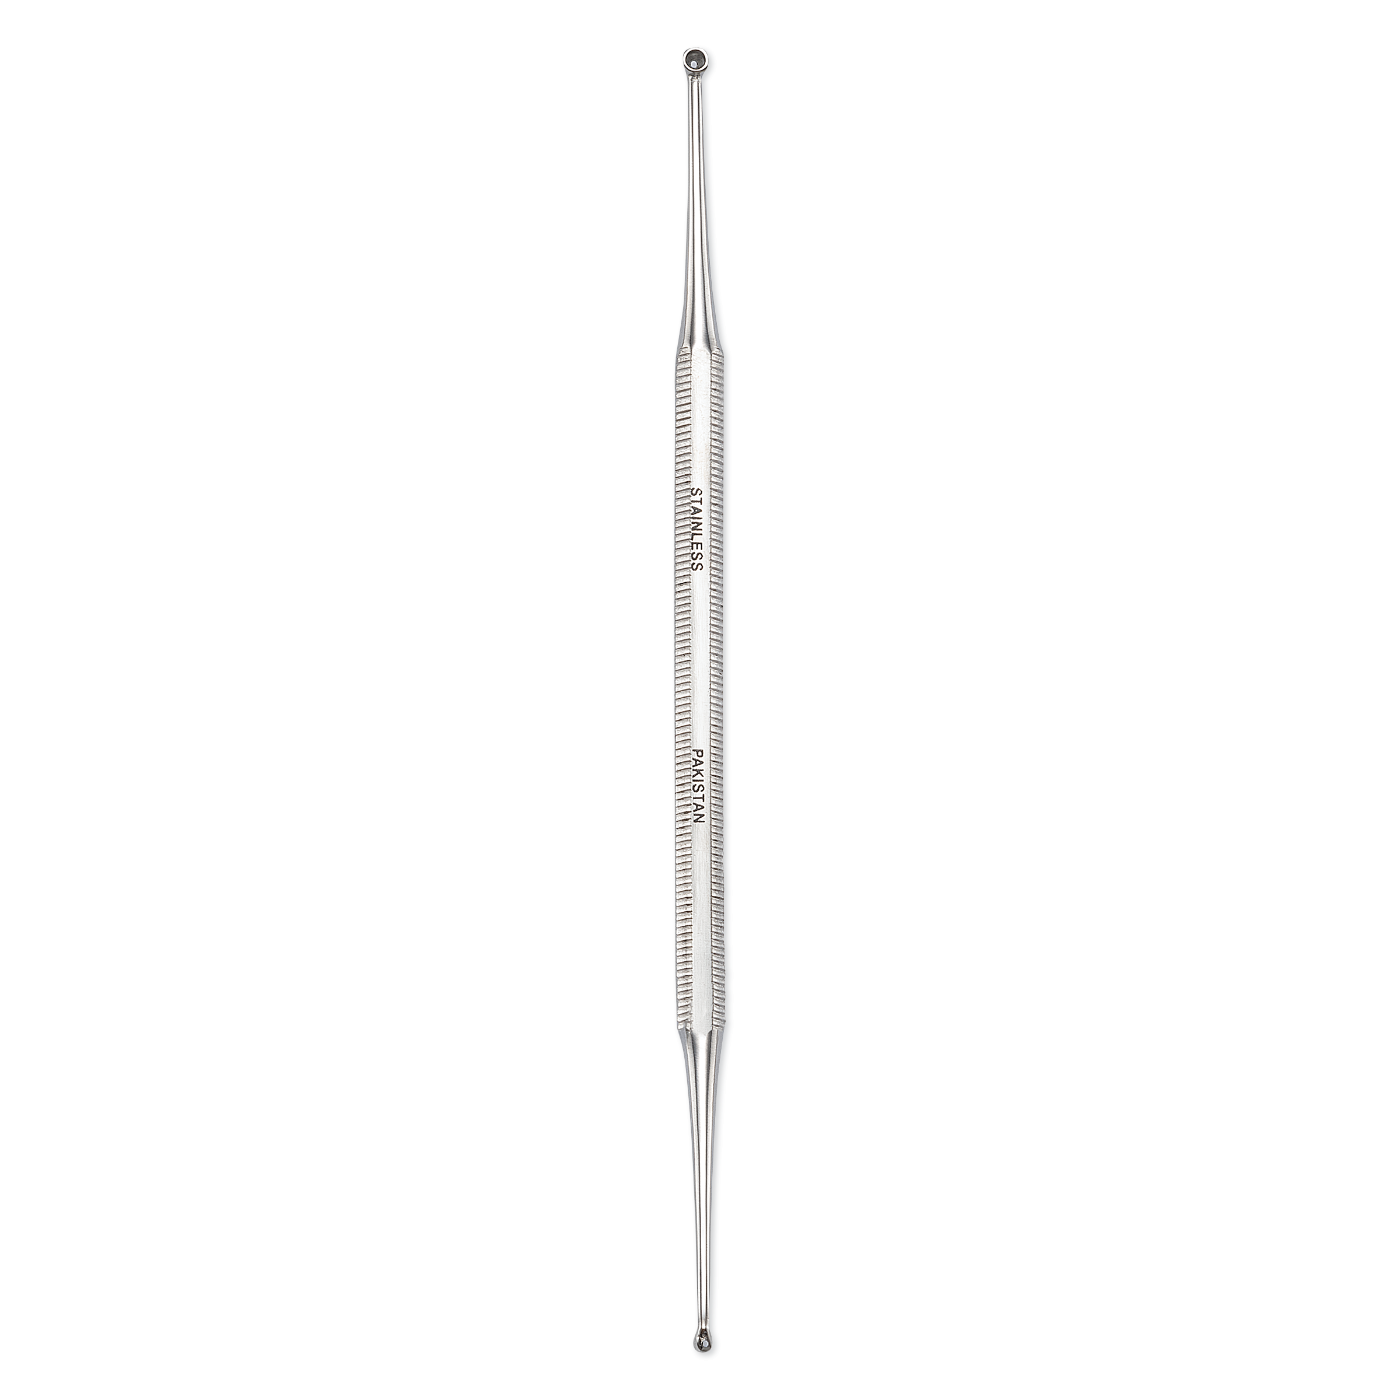 Curette Nail Cleaner